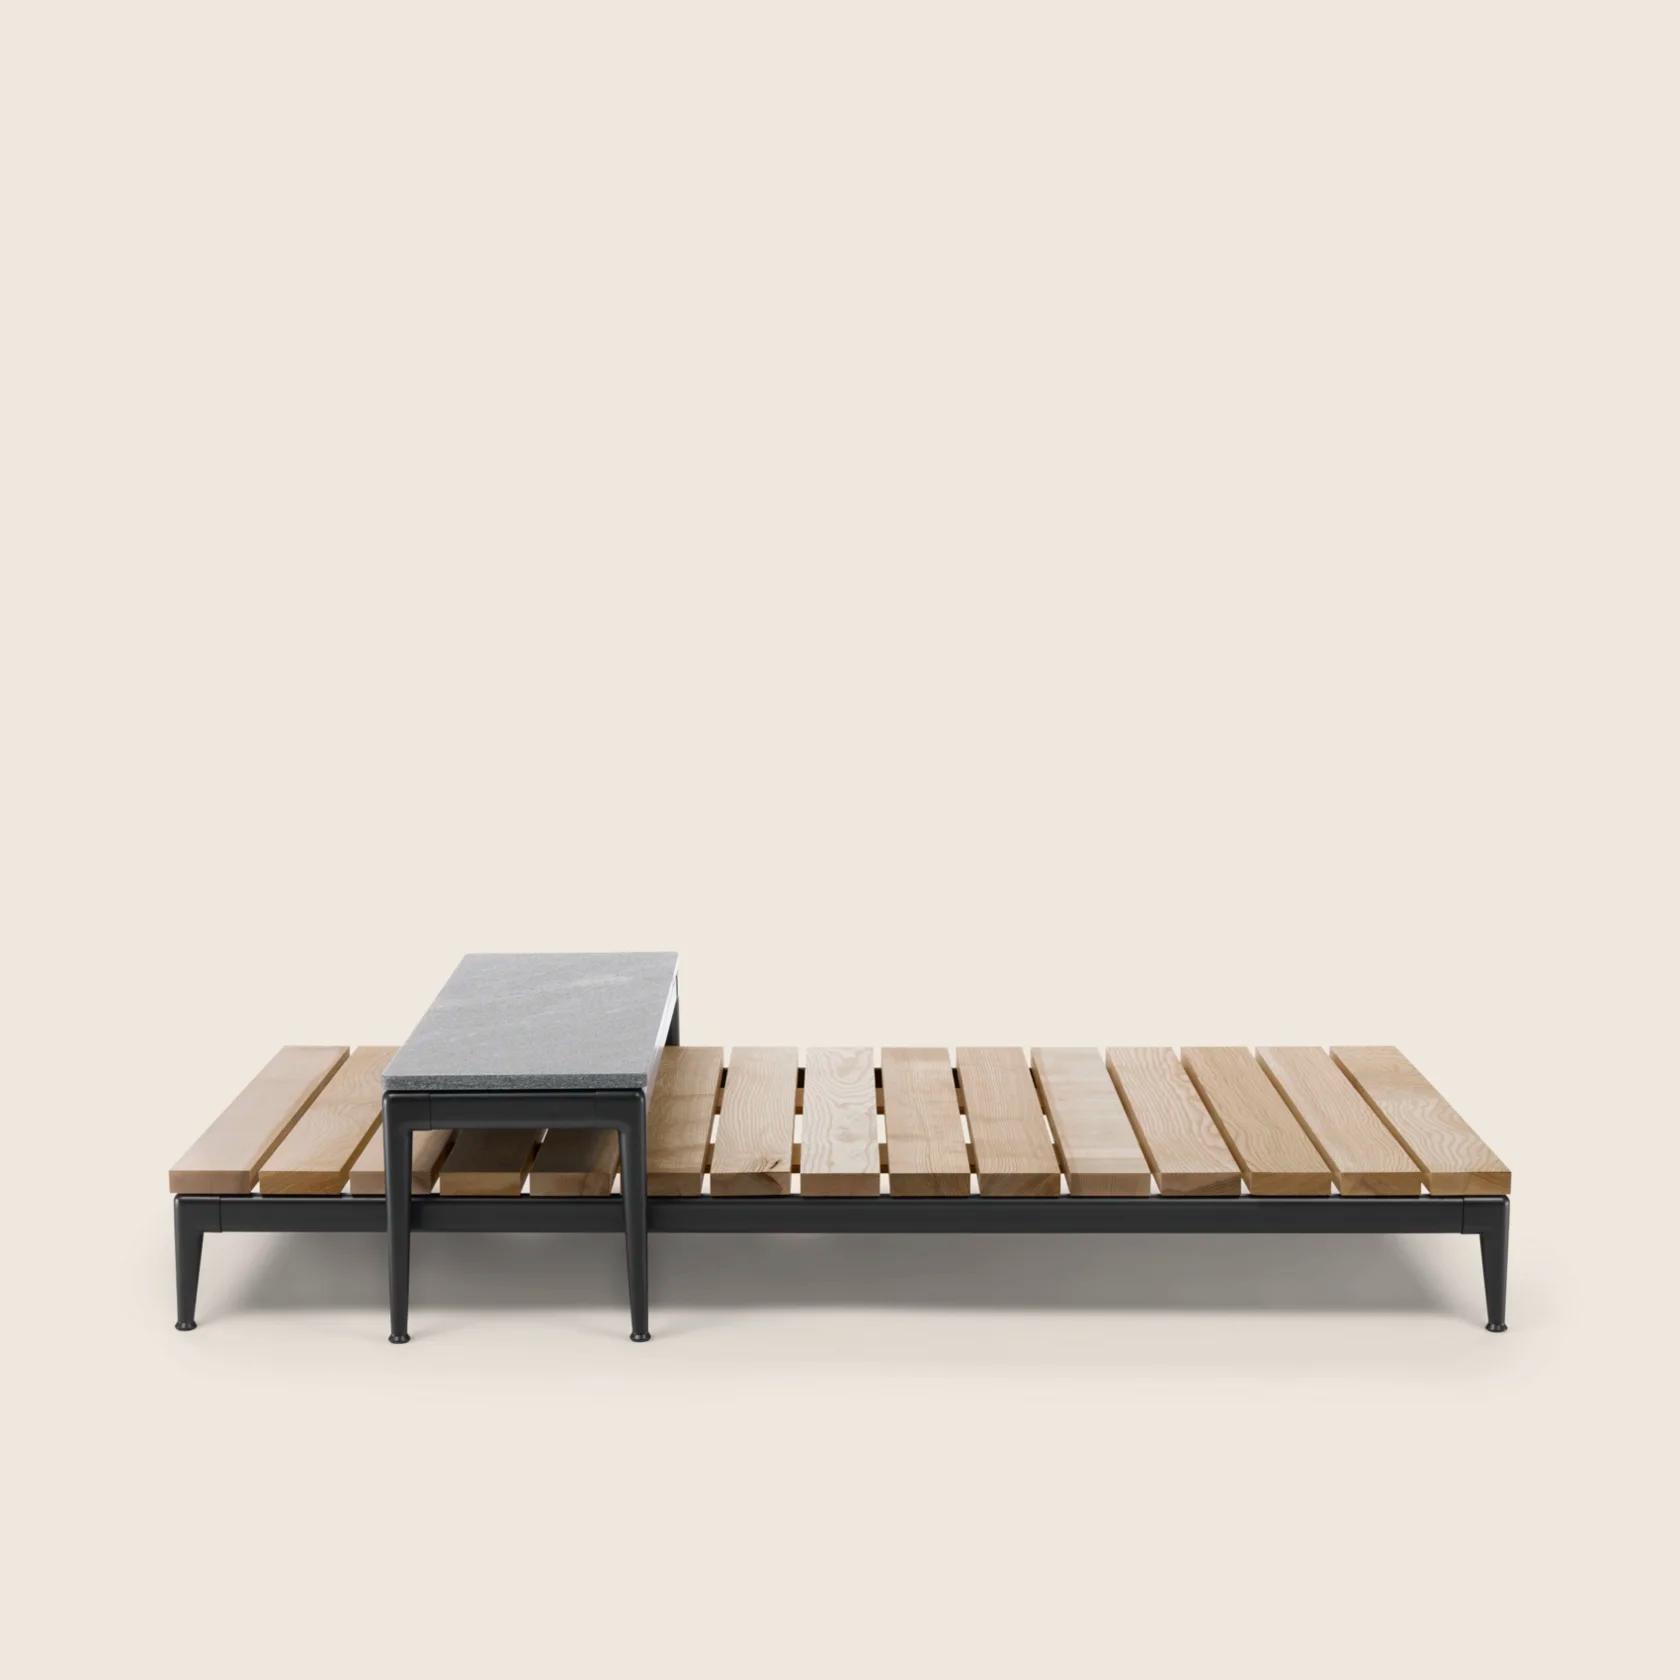 0283H1_PICO OUTDOOR_COFFEETABLE_01.png